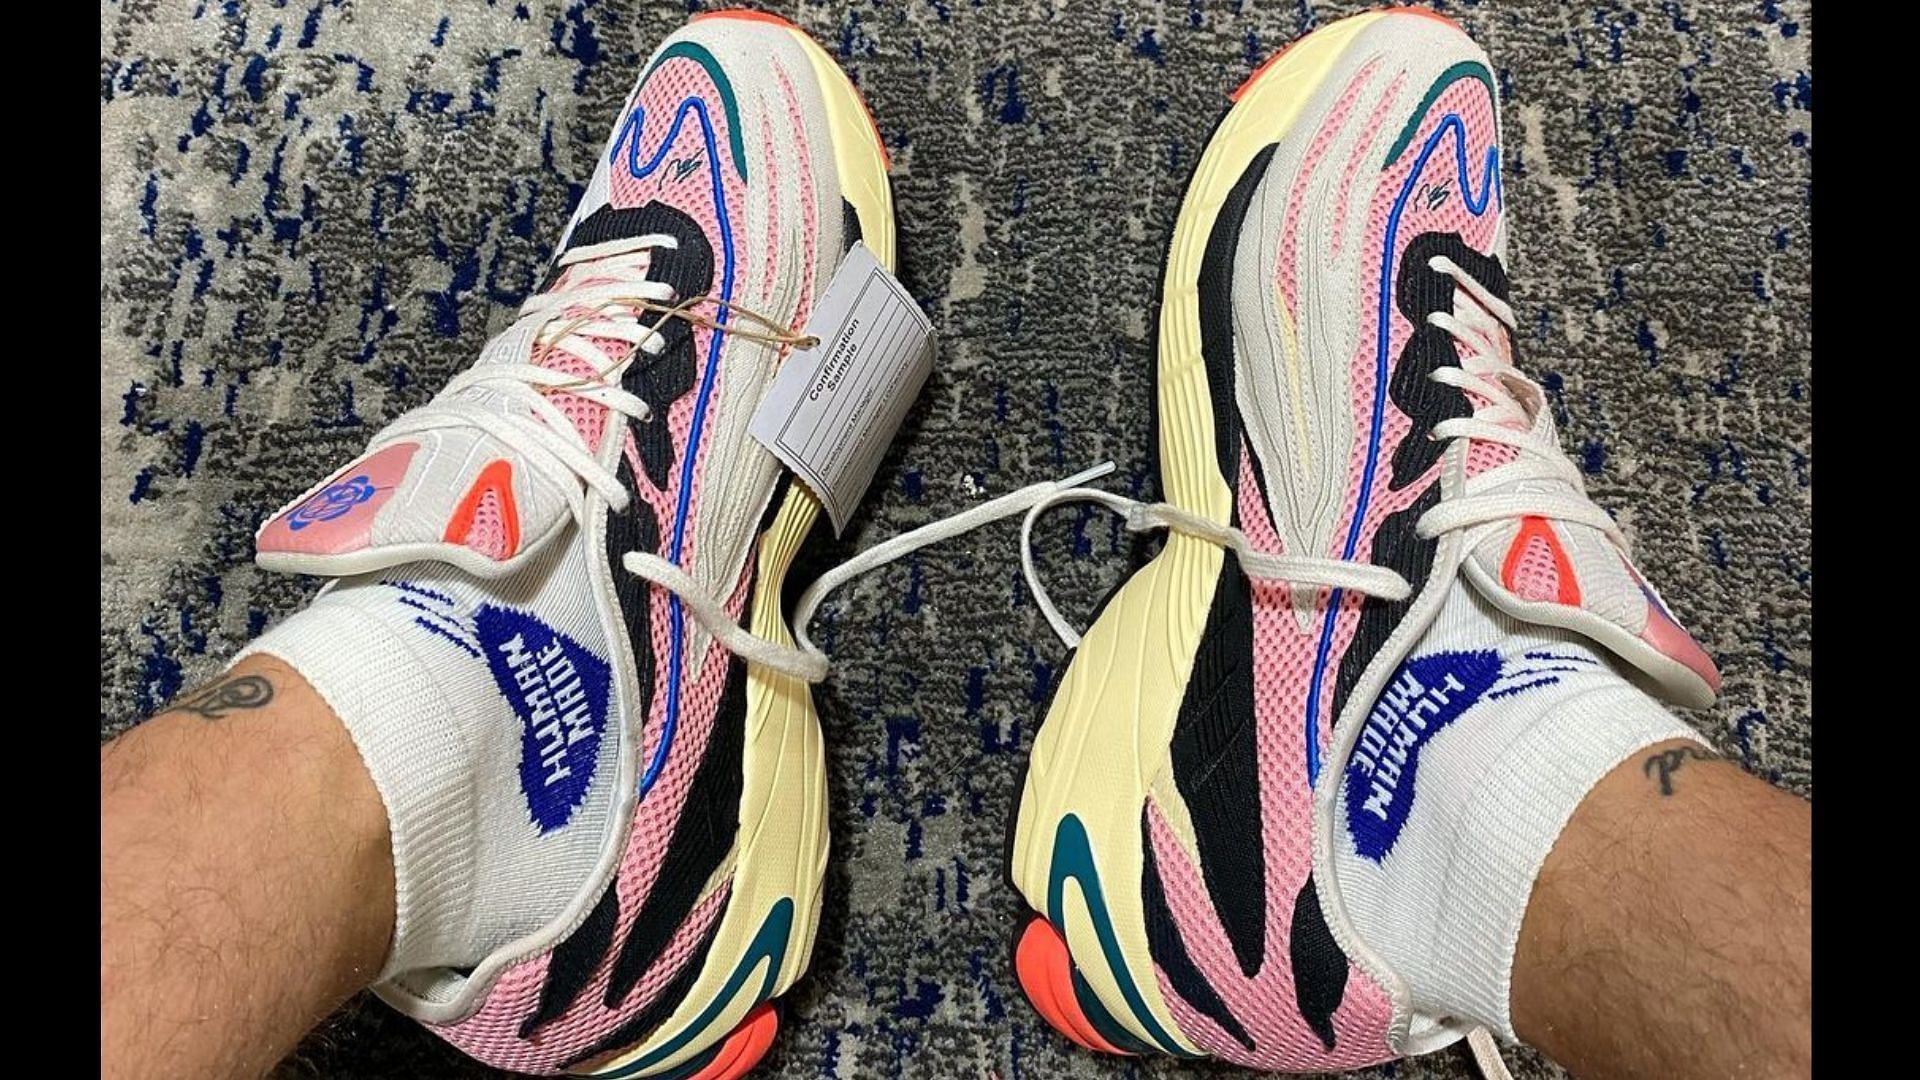 Where to buy Sean Wotherspoon x Adidas Orketro sneakers